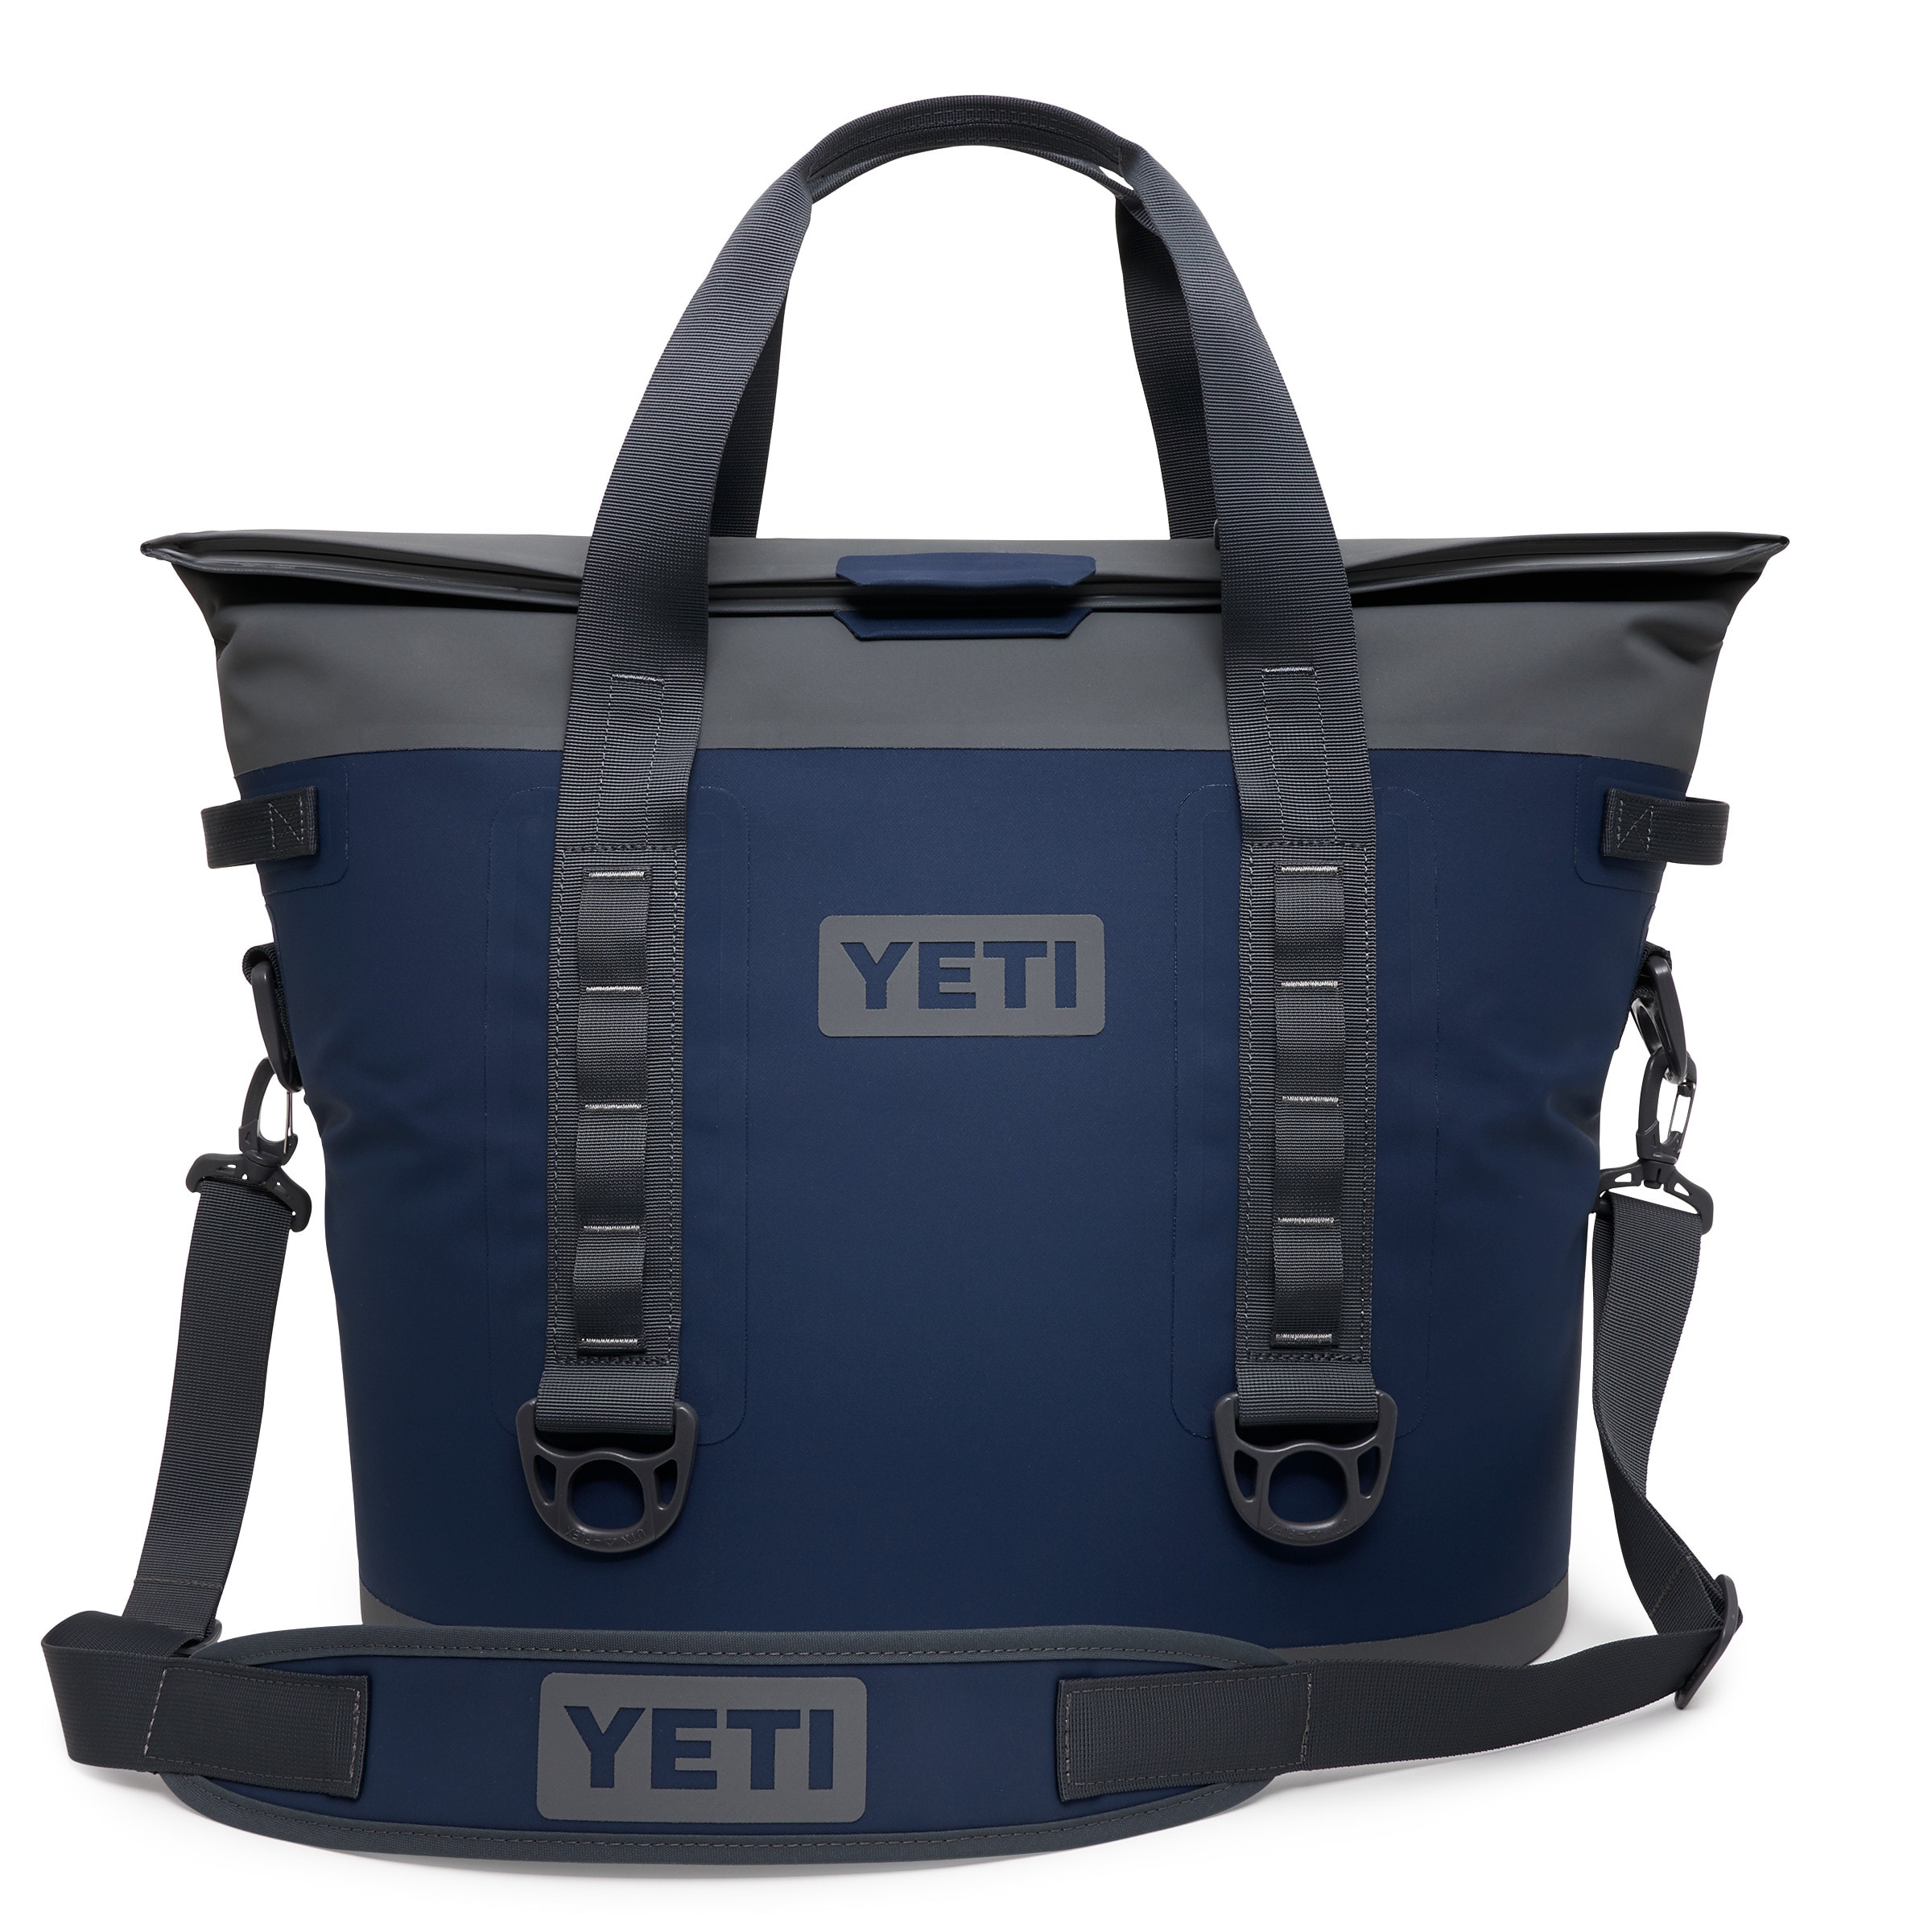 YETI Hopper M30 Insulated Bag Cooler, Navy in the Portable Coolers 